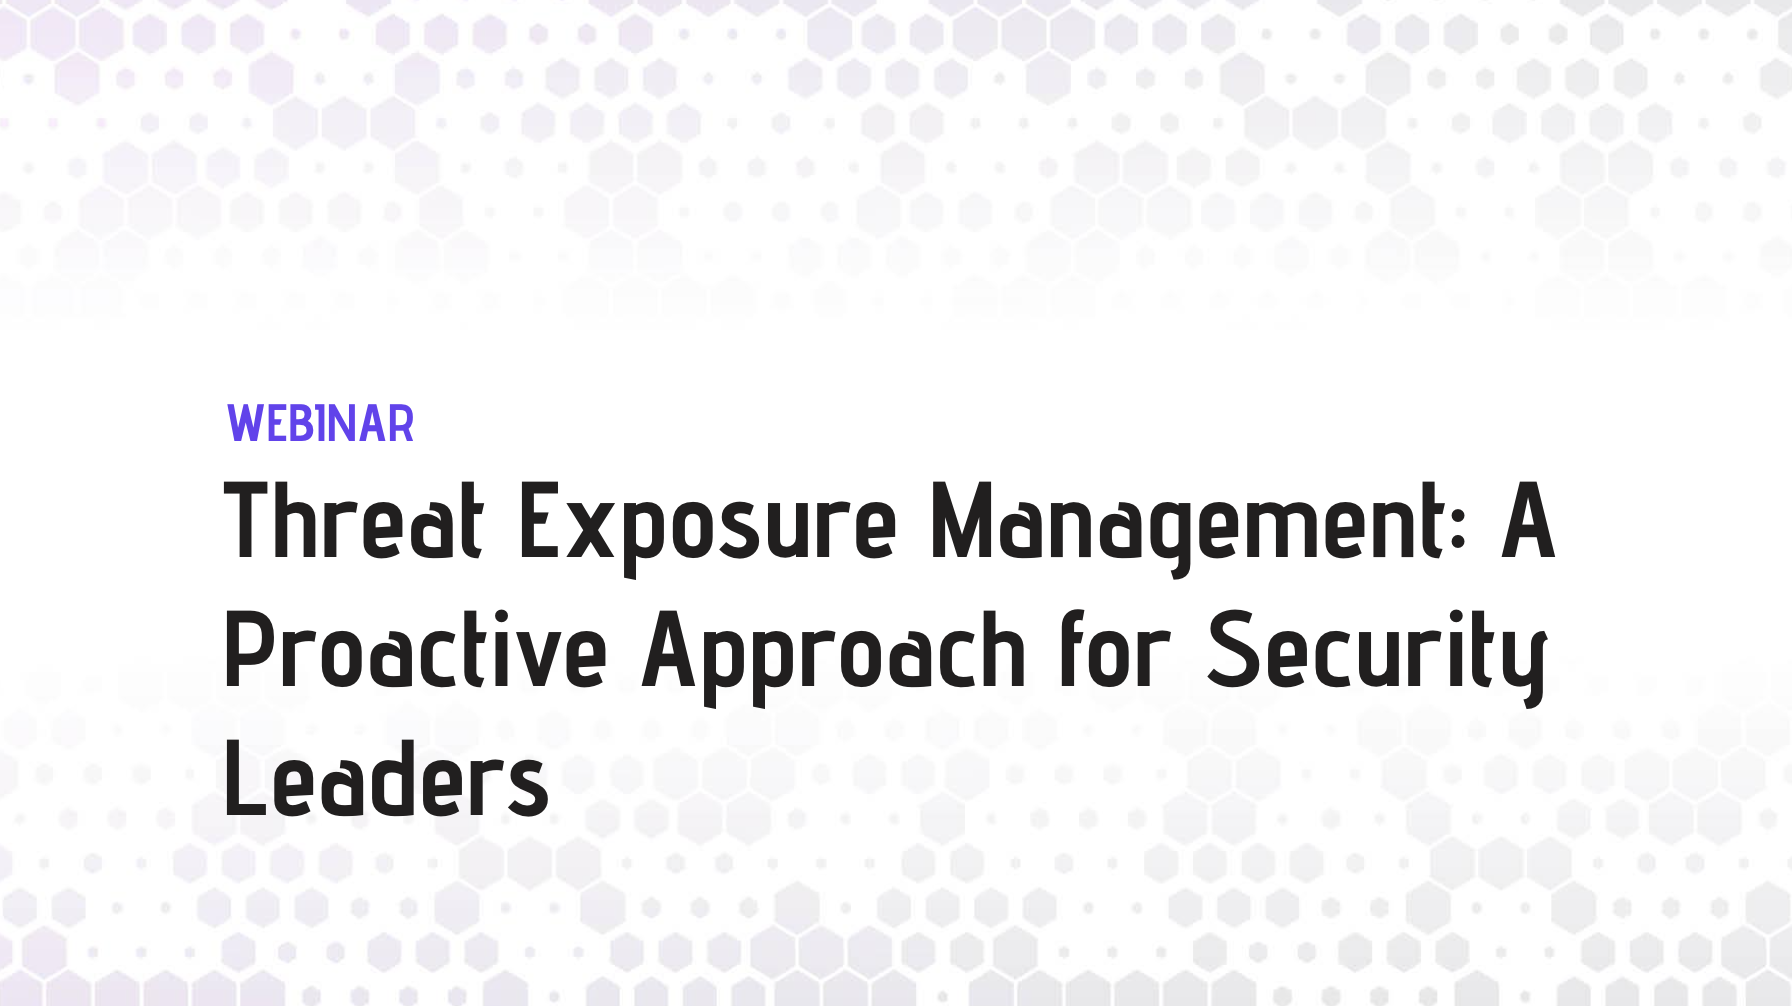 Threat Exposure Management: A Proactive Approach for Security Leaders